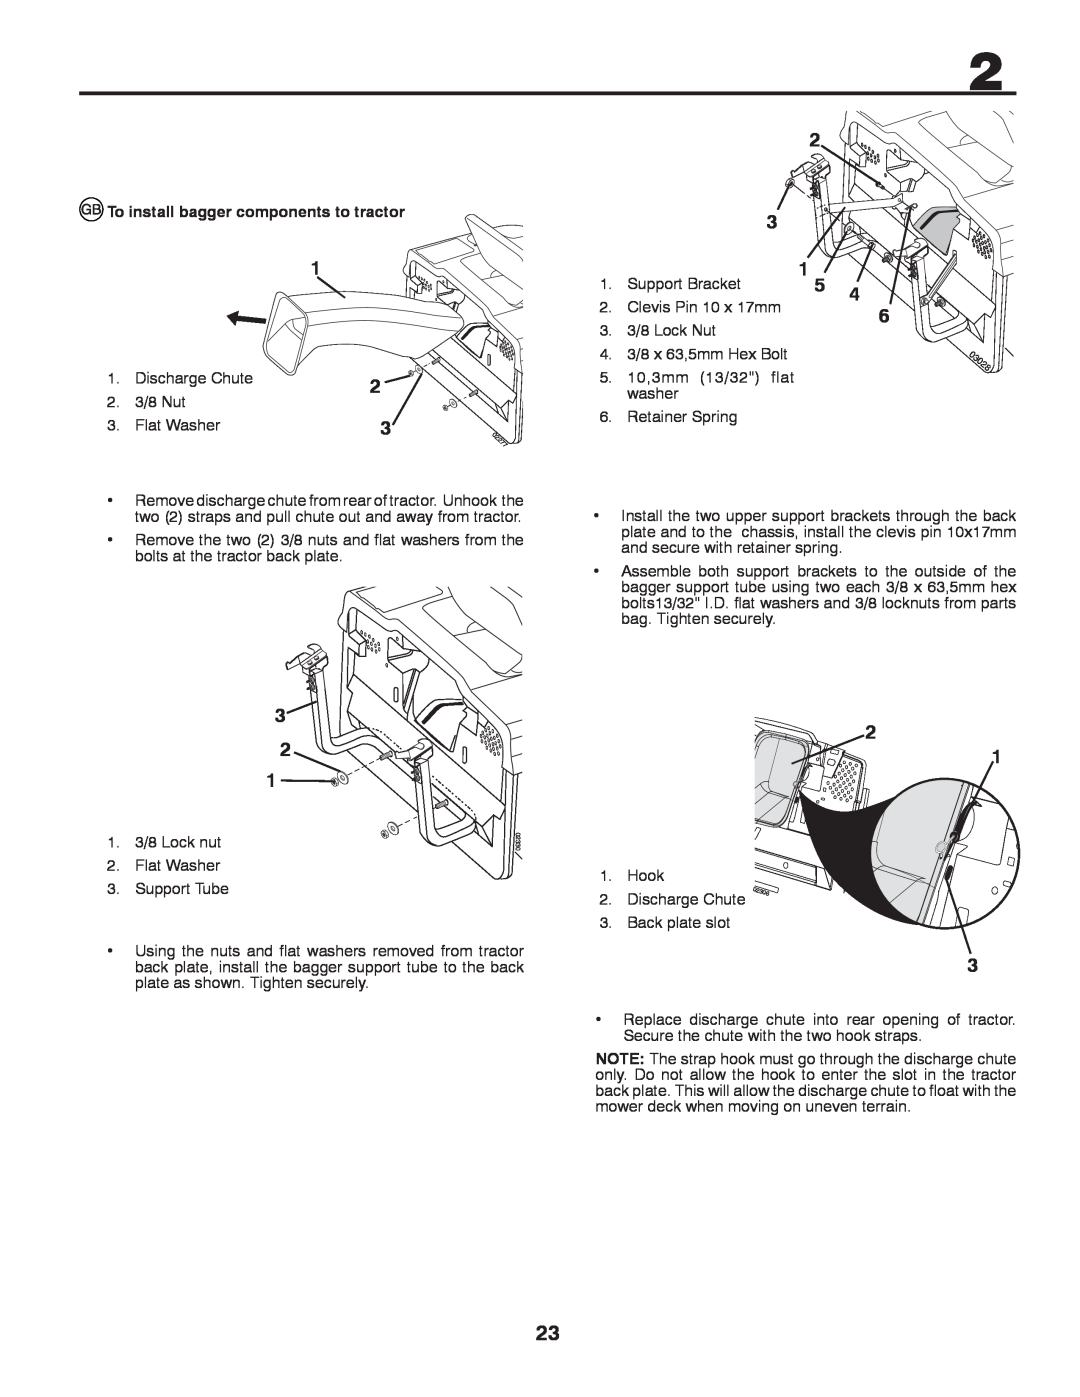 Husqvarna CTH140TWIN instruction manual To install bagger components to tractor 